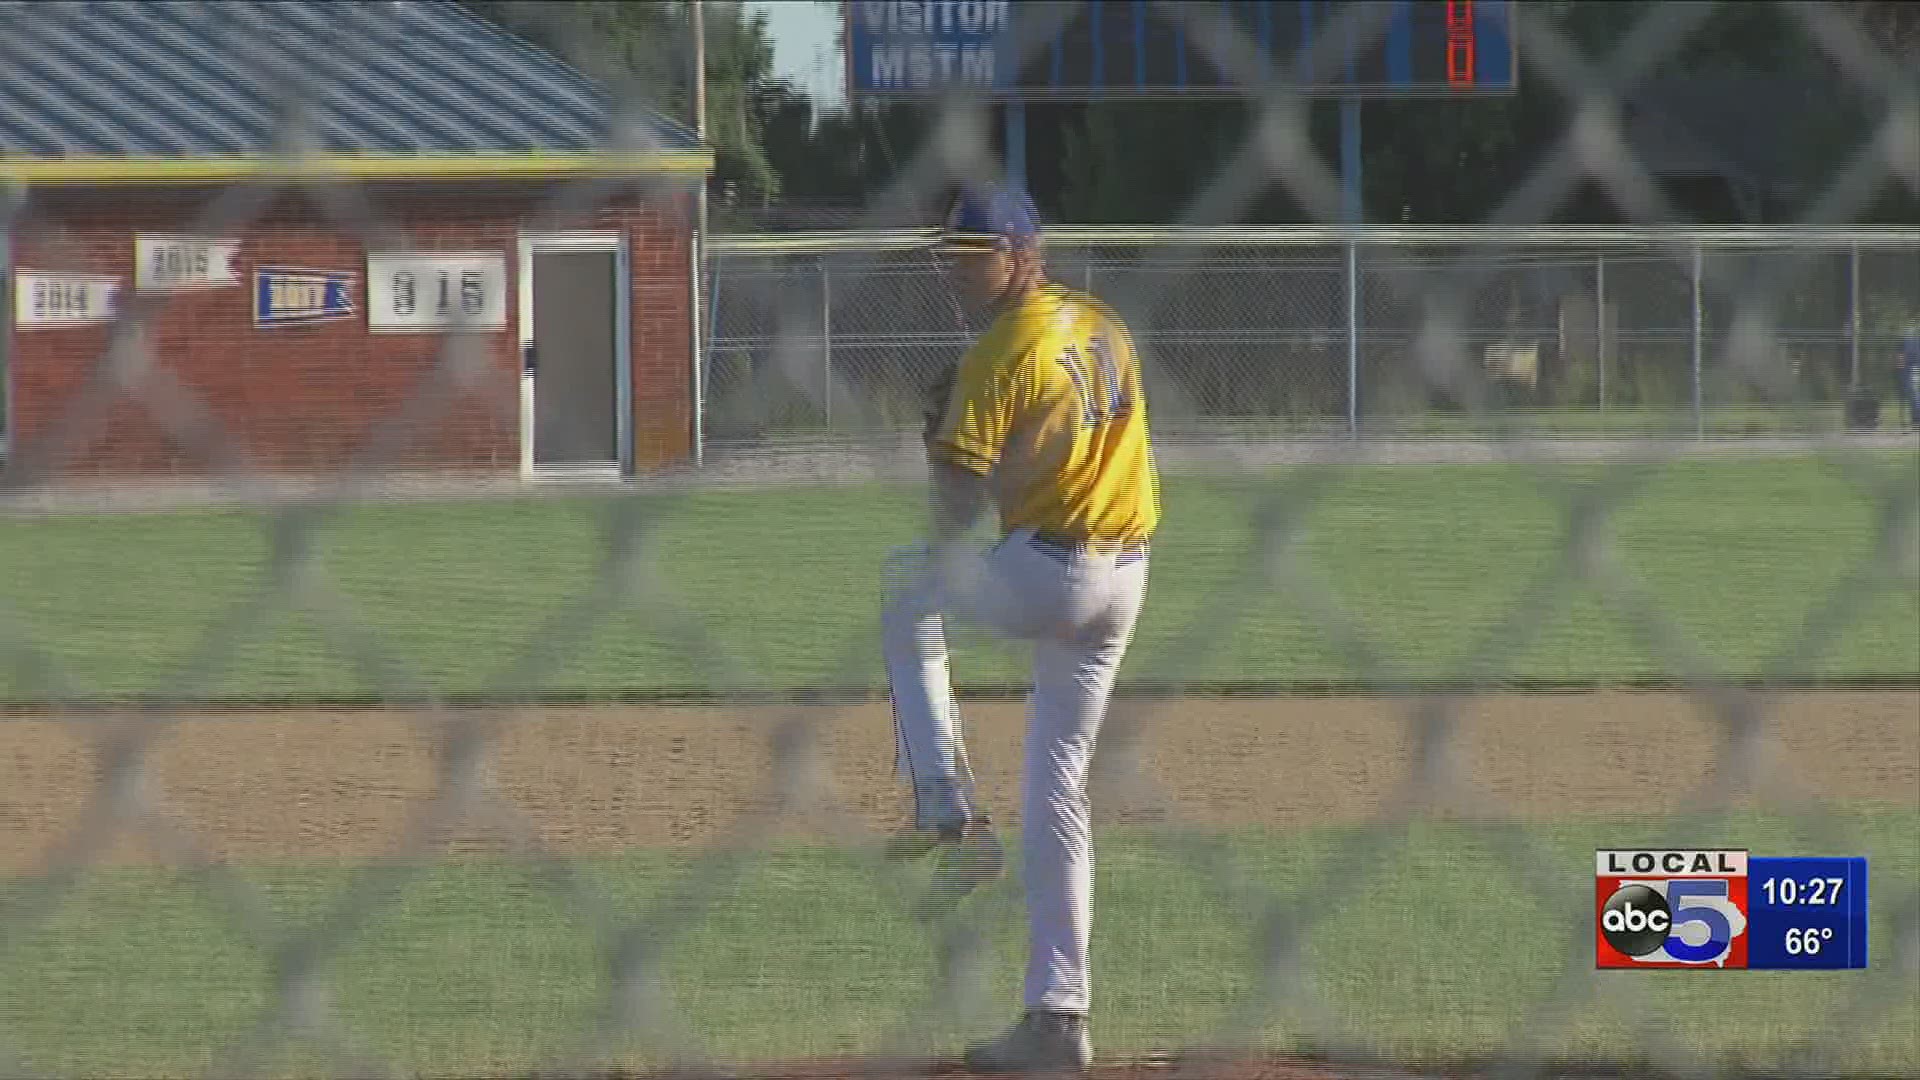 Martensdale-St. Marys tops Woodward-Granger 3-1 in a defensive battle on the diamond Tuesday night.